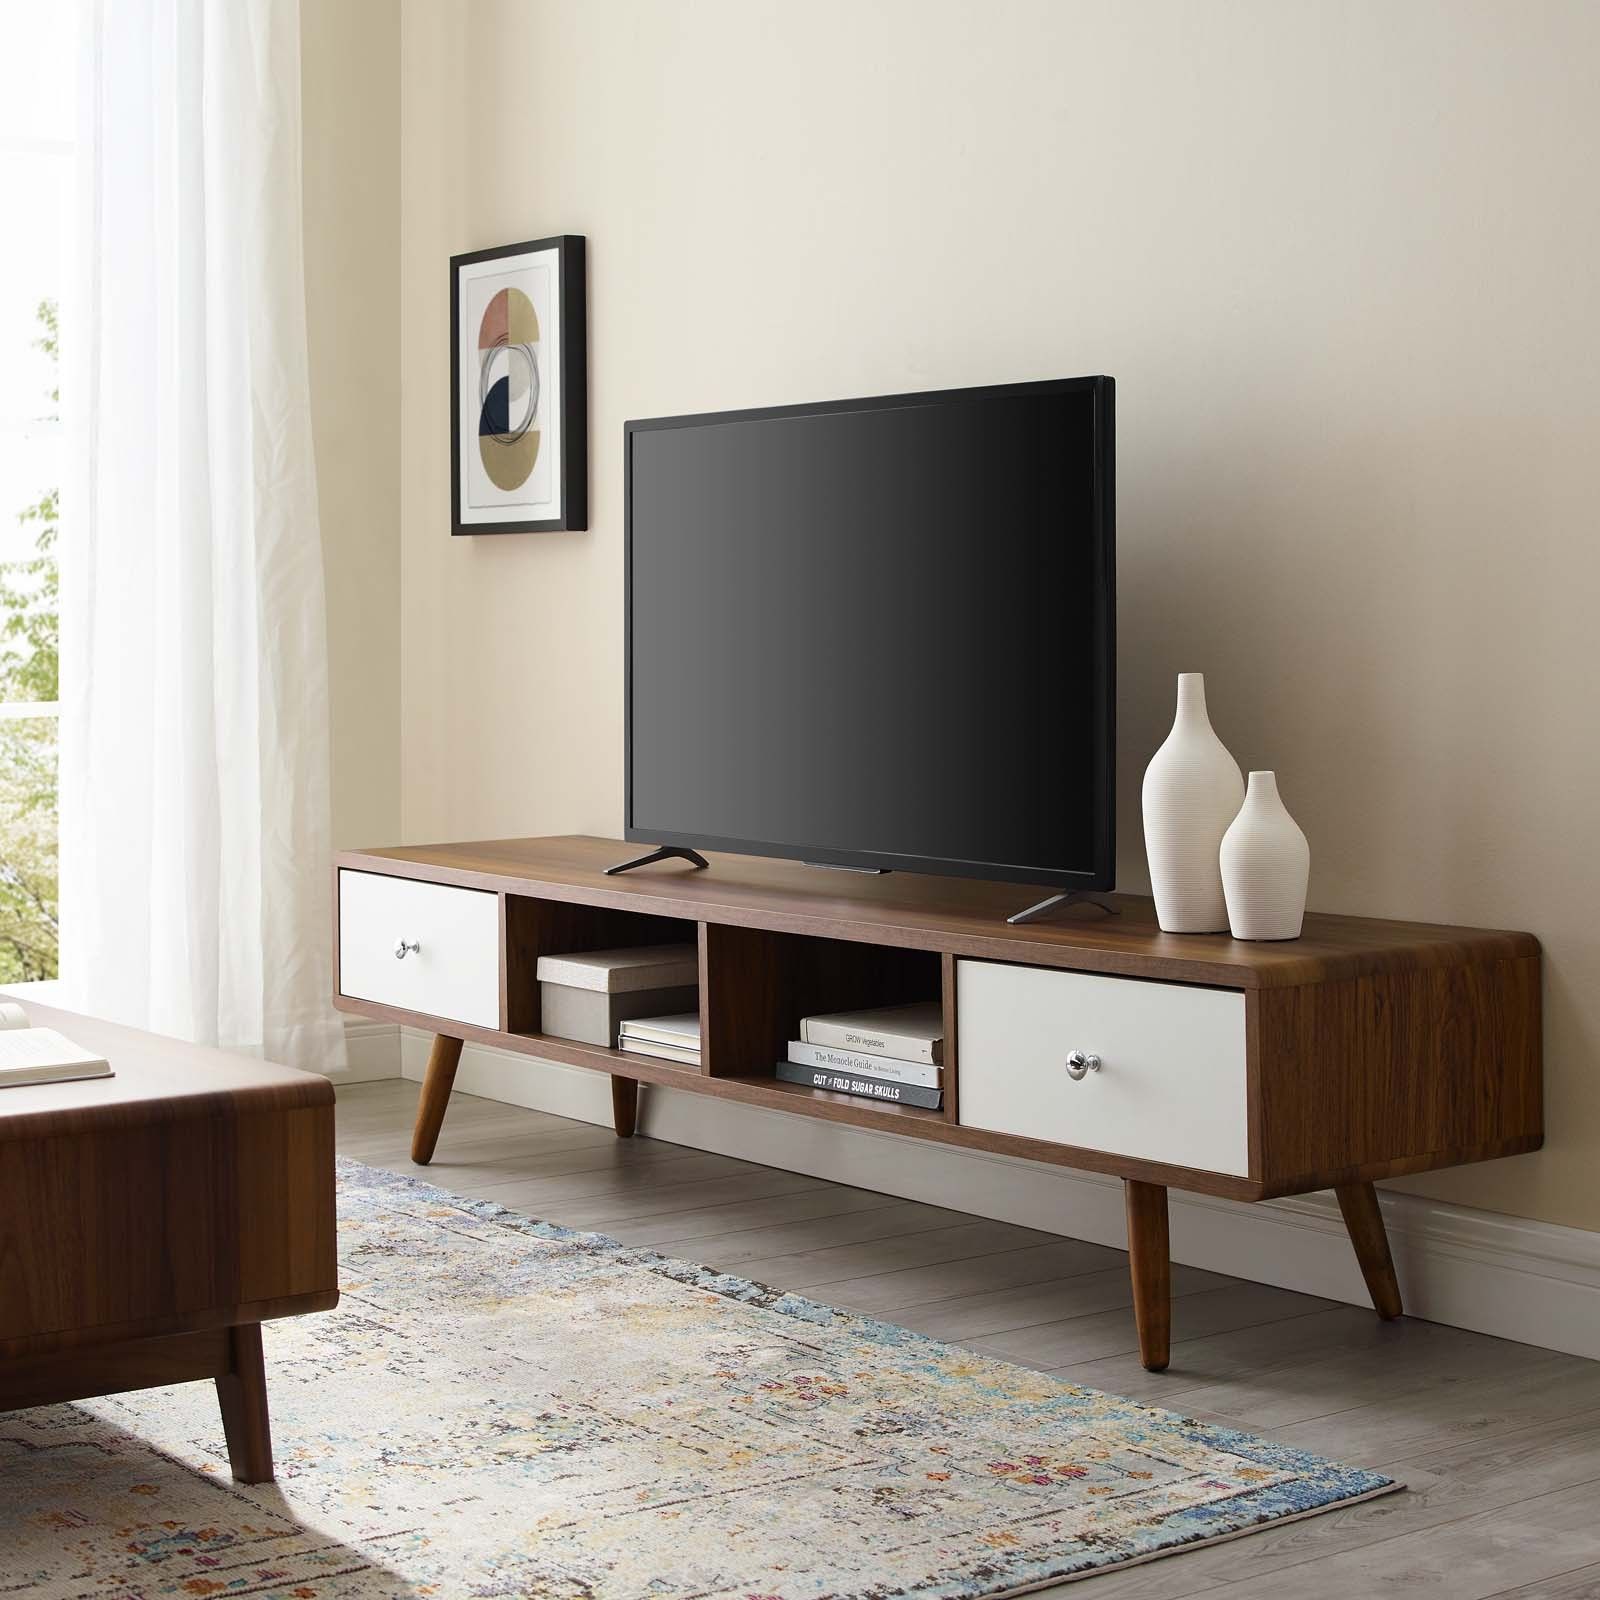 Transmit Walnut White 70 Inch Media Console Wood Tv Stand Within White Wood Tv Cabinets (View 13 of 15)